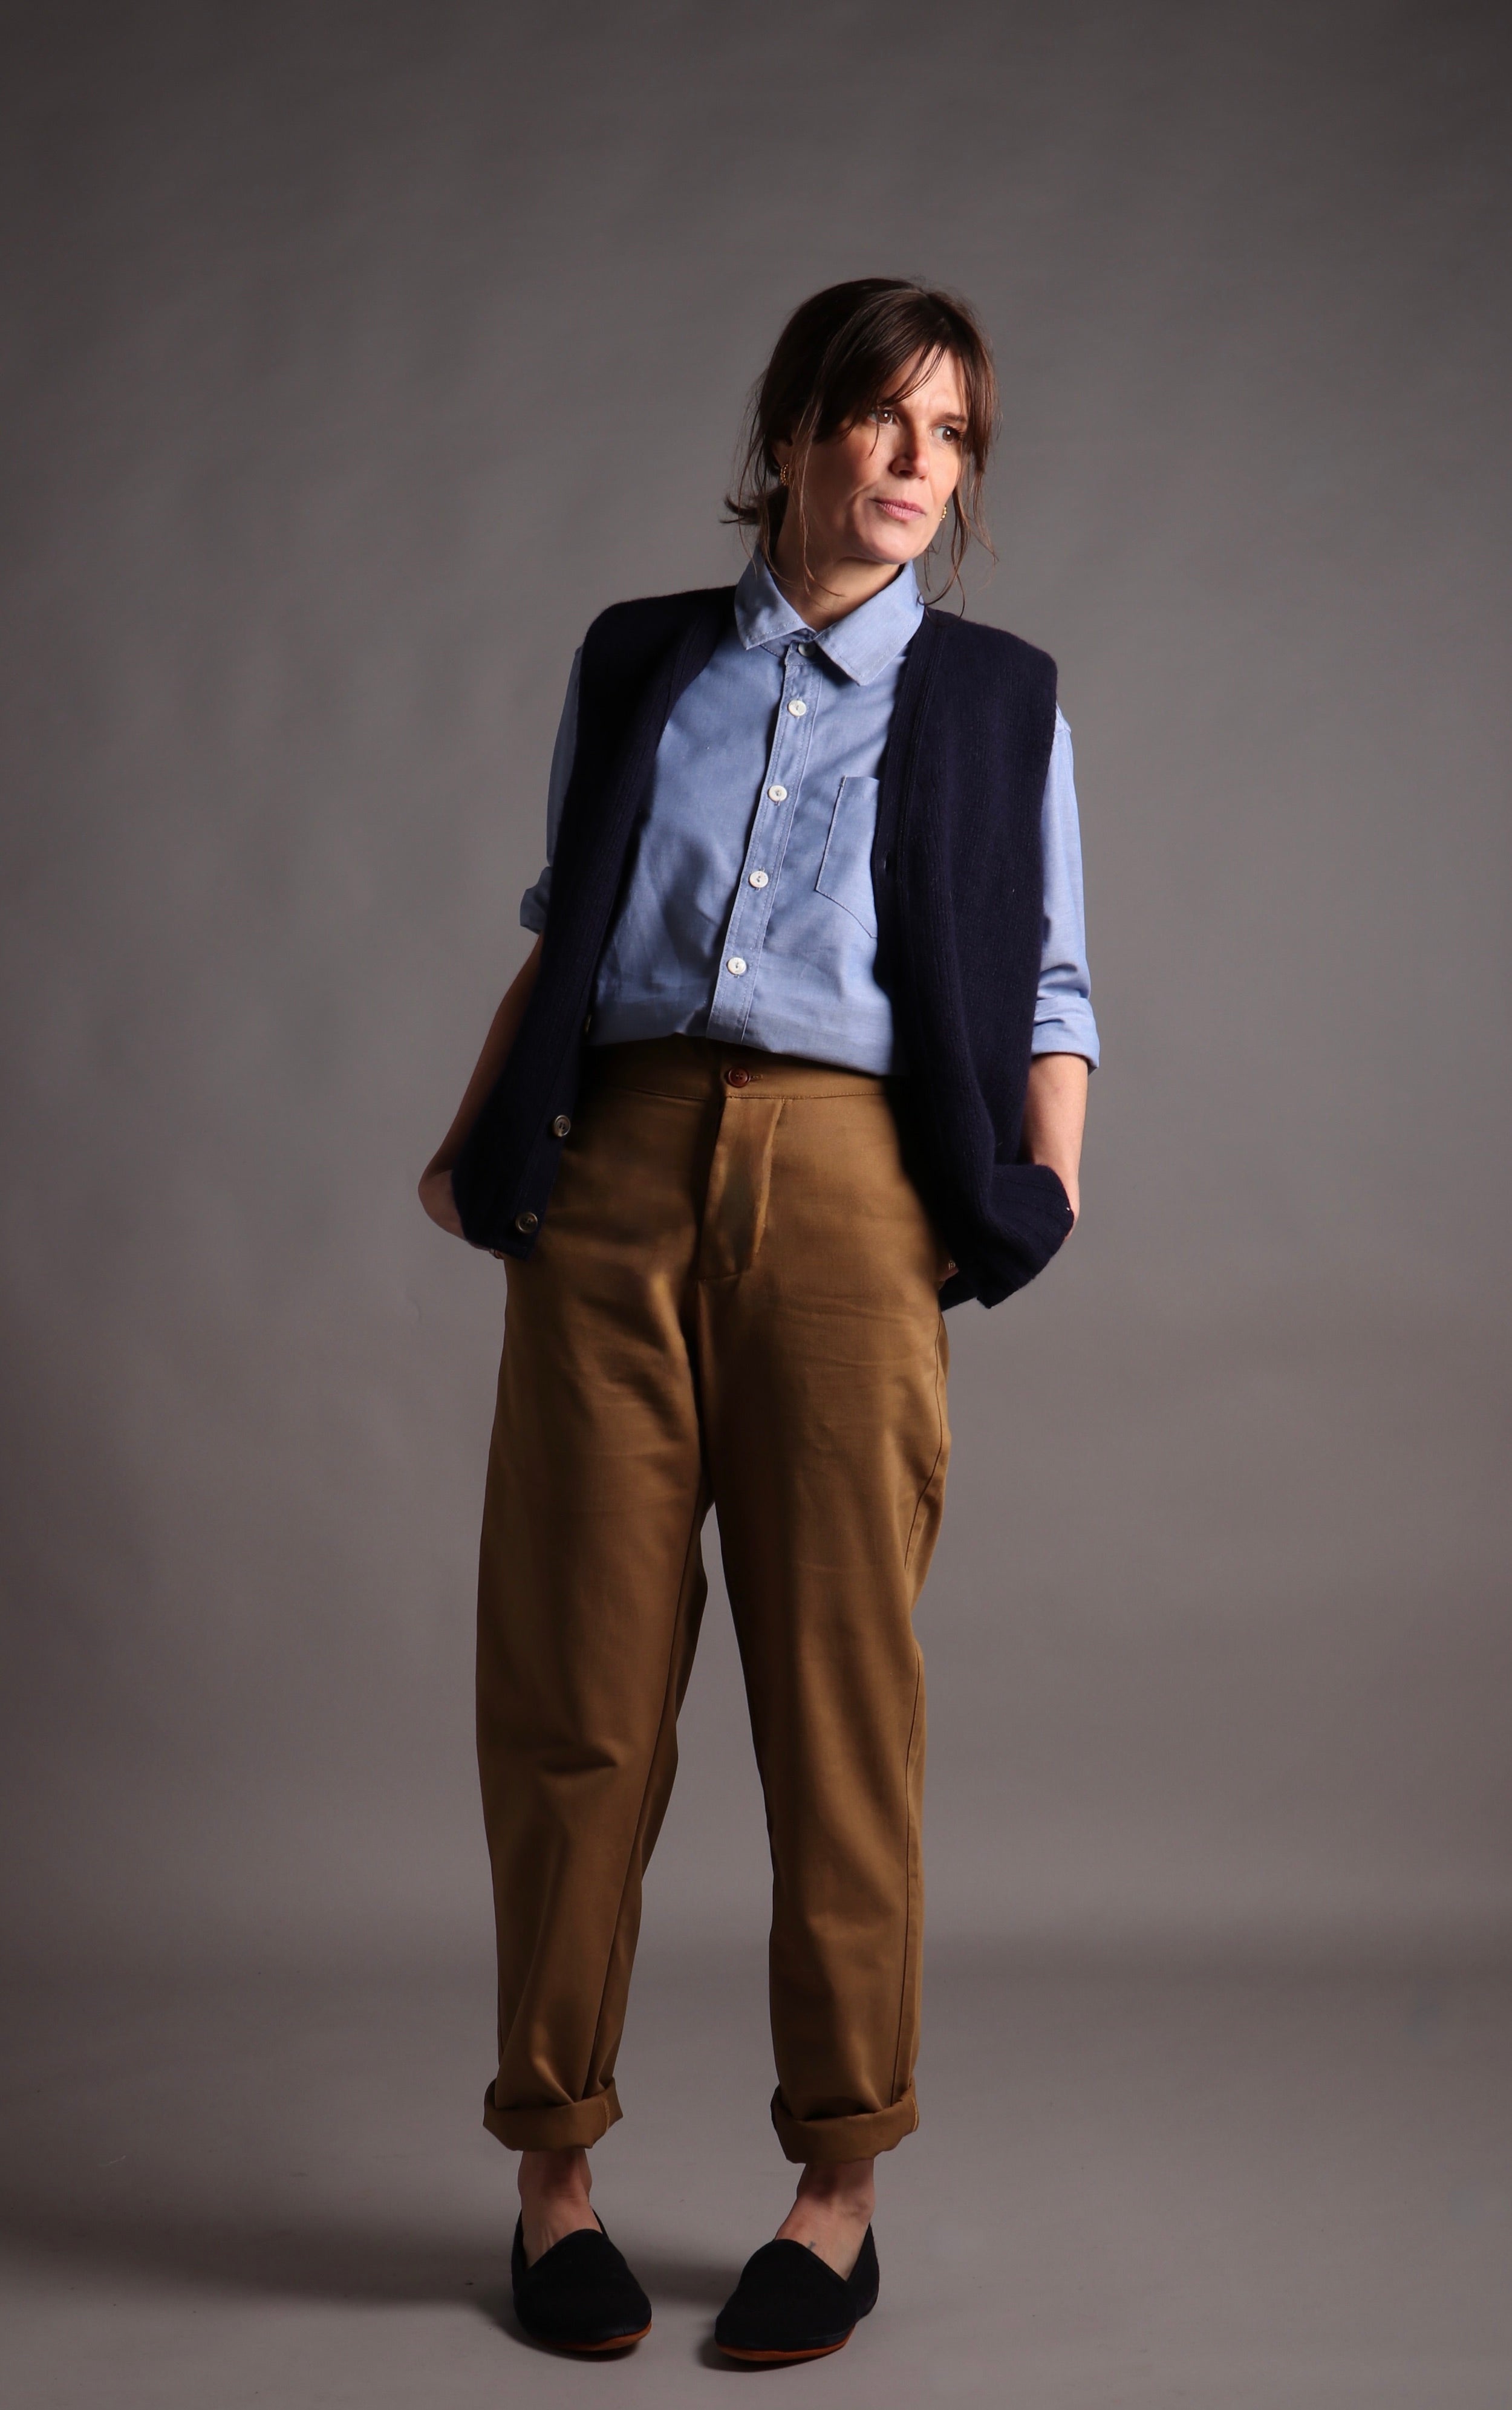 Kate wears Carrier Company Colonial Trouser in Navy Cotton Drill with Chambray Shirt